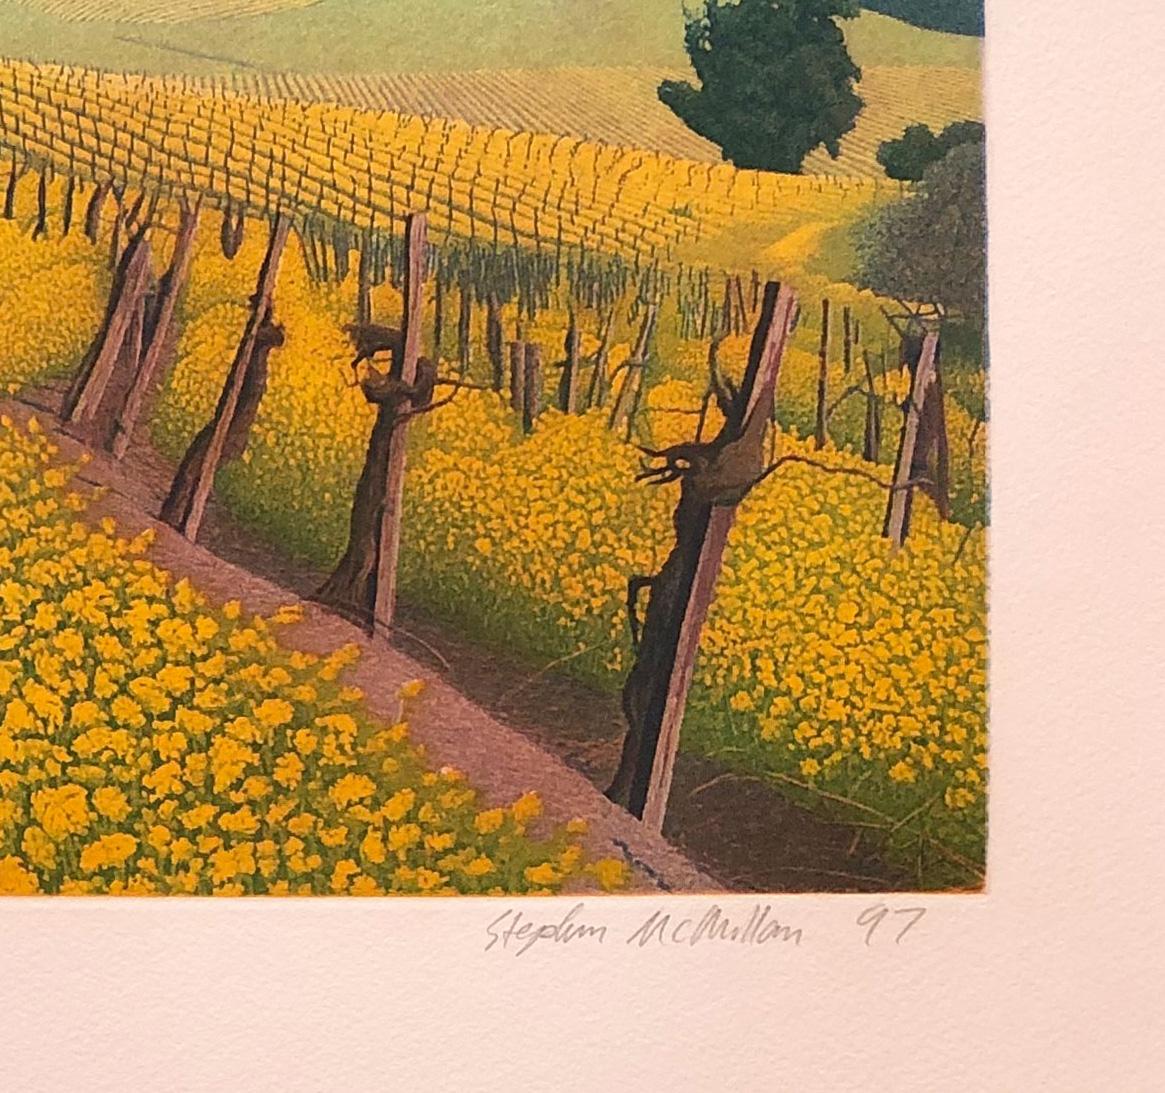 Mustard Flowers - Contemporary Print by Stephen McMillan